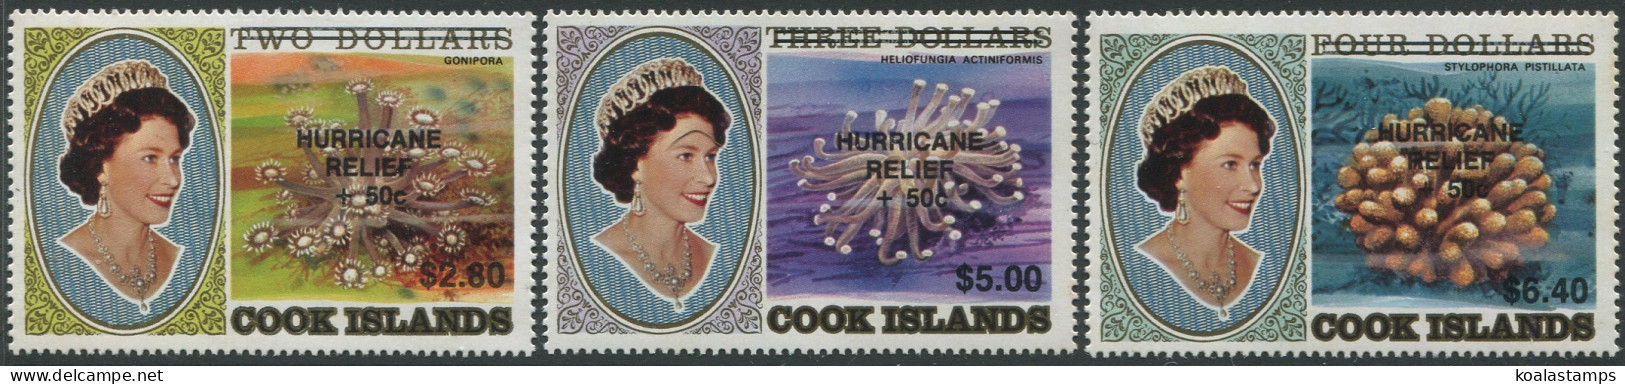 Cook Islands 1987 SG1190-1192 Corals High Values HURRICANE RELIEF +50c (3) MNH - Cookinseln